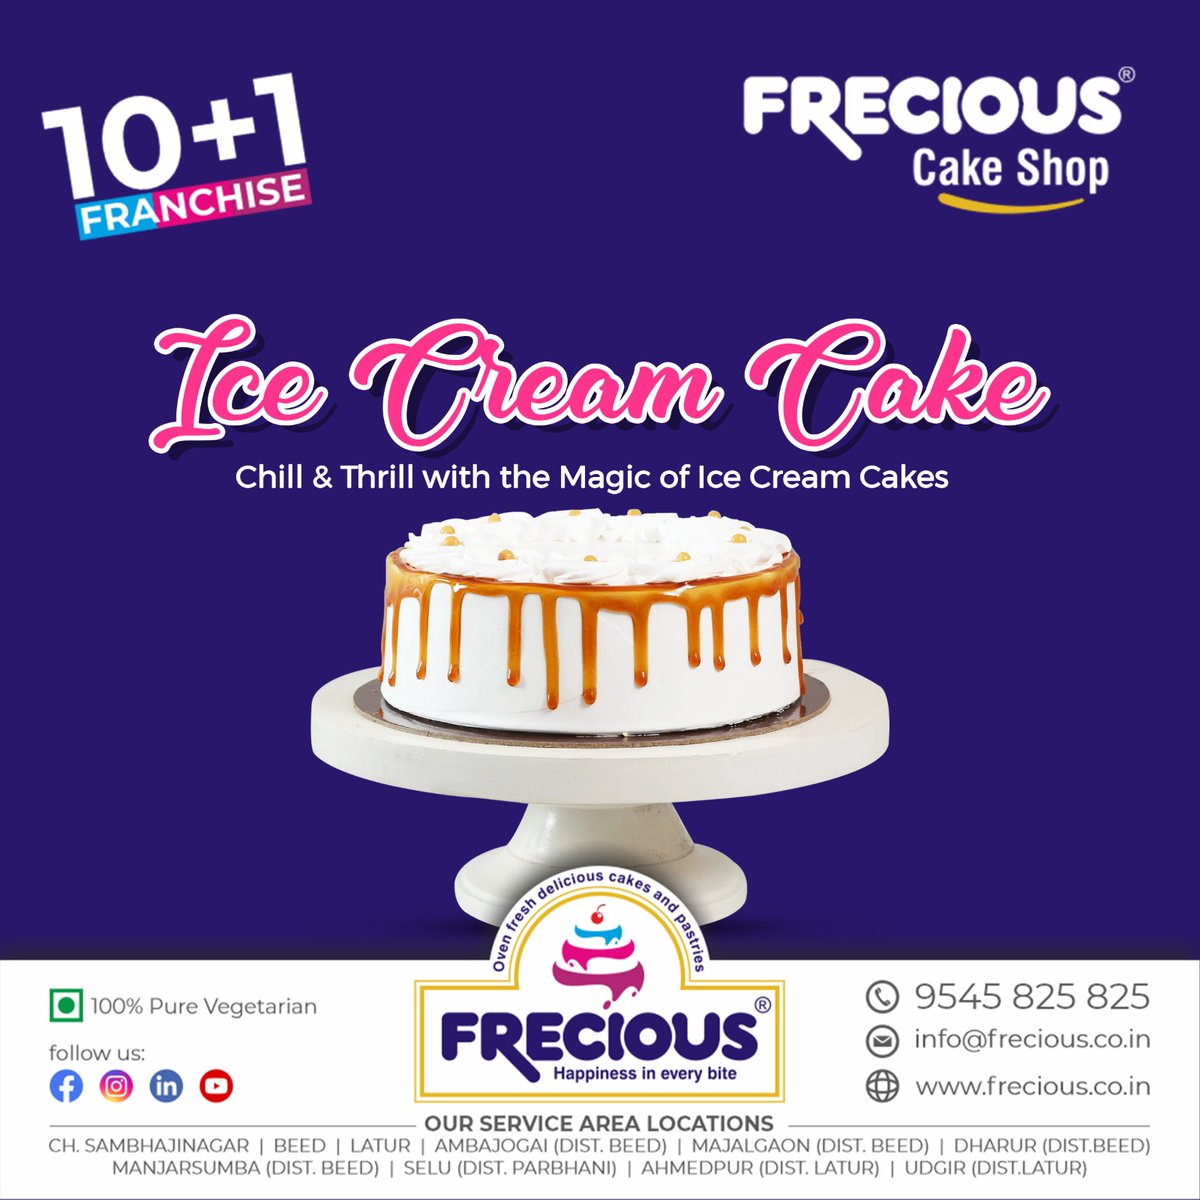 🍰 FRECIOUS Cake Shop: Indulge in Ice Cream Cake Magic! 🍦

10+1 FRANCHISE Available!

Dive into the blissful world of Ice Cream Cakes at FRECIOUS Cake Shop. 🎉

Follow us for happiness in every bite!

#FRECIOUSCakes #IceCreamCakes #CakeMagic #ChillAndThrill